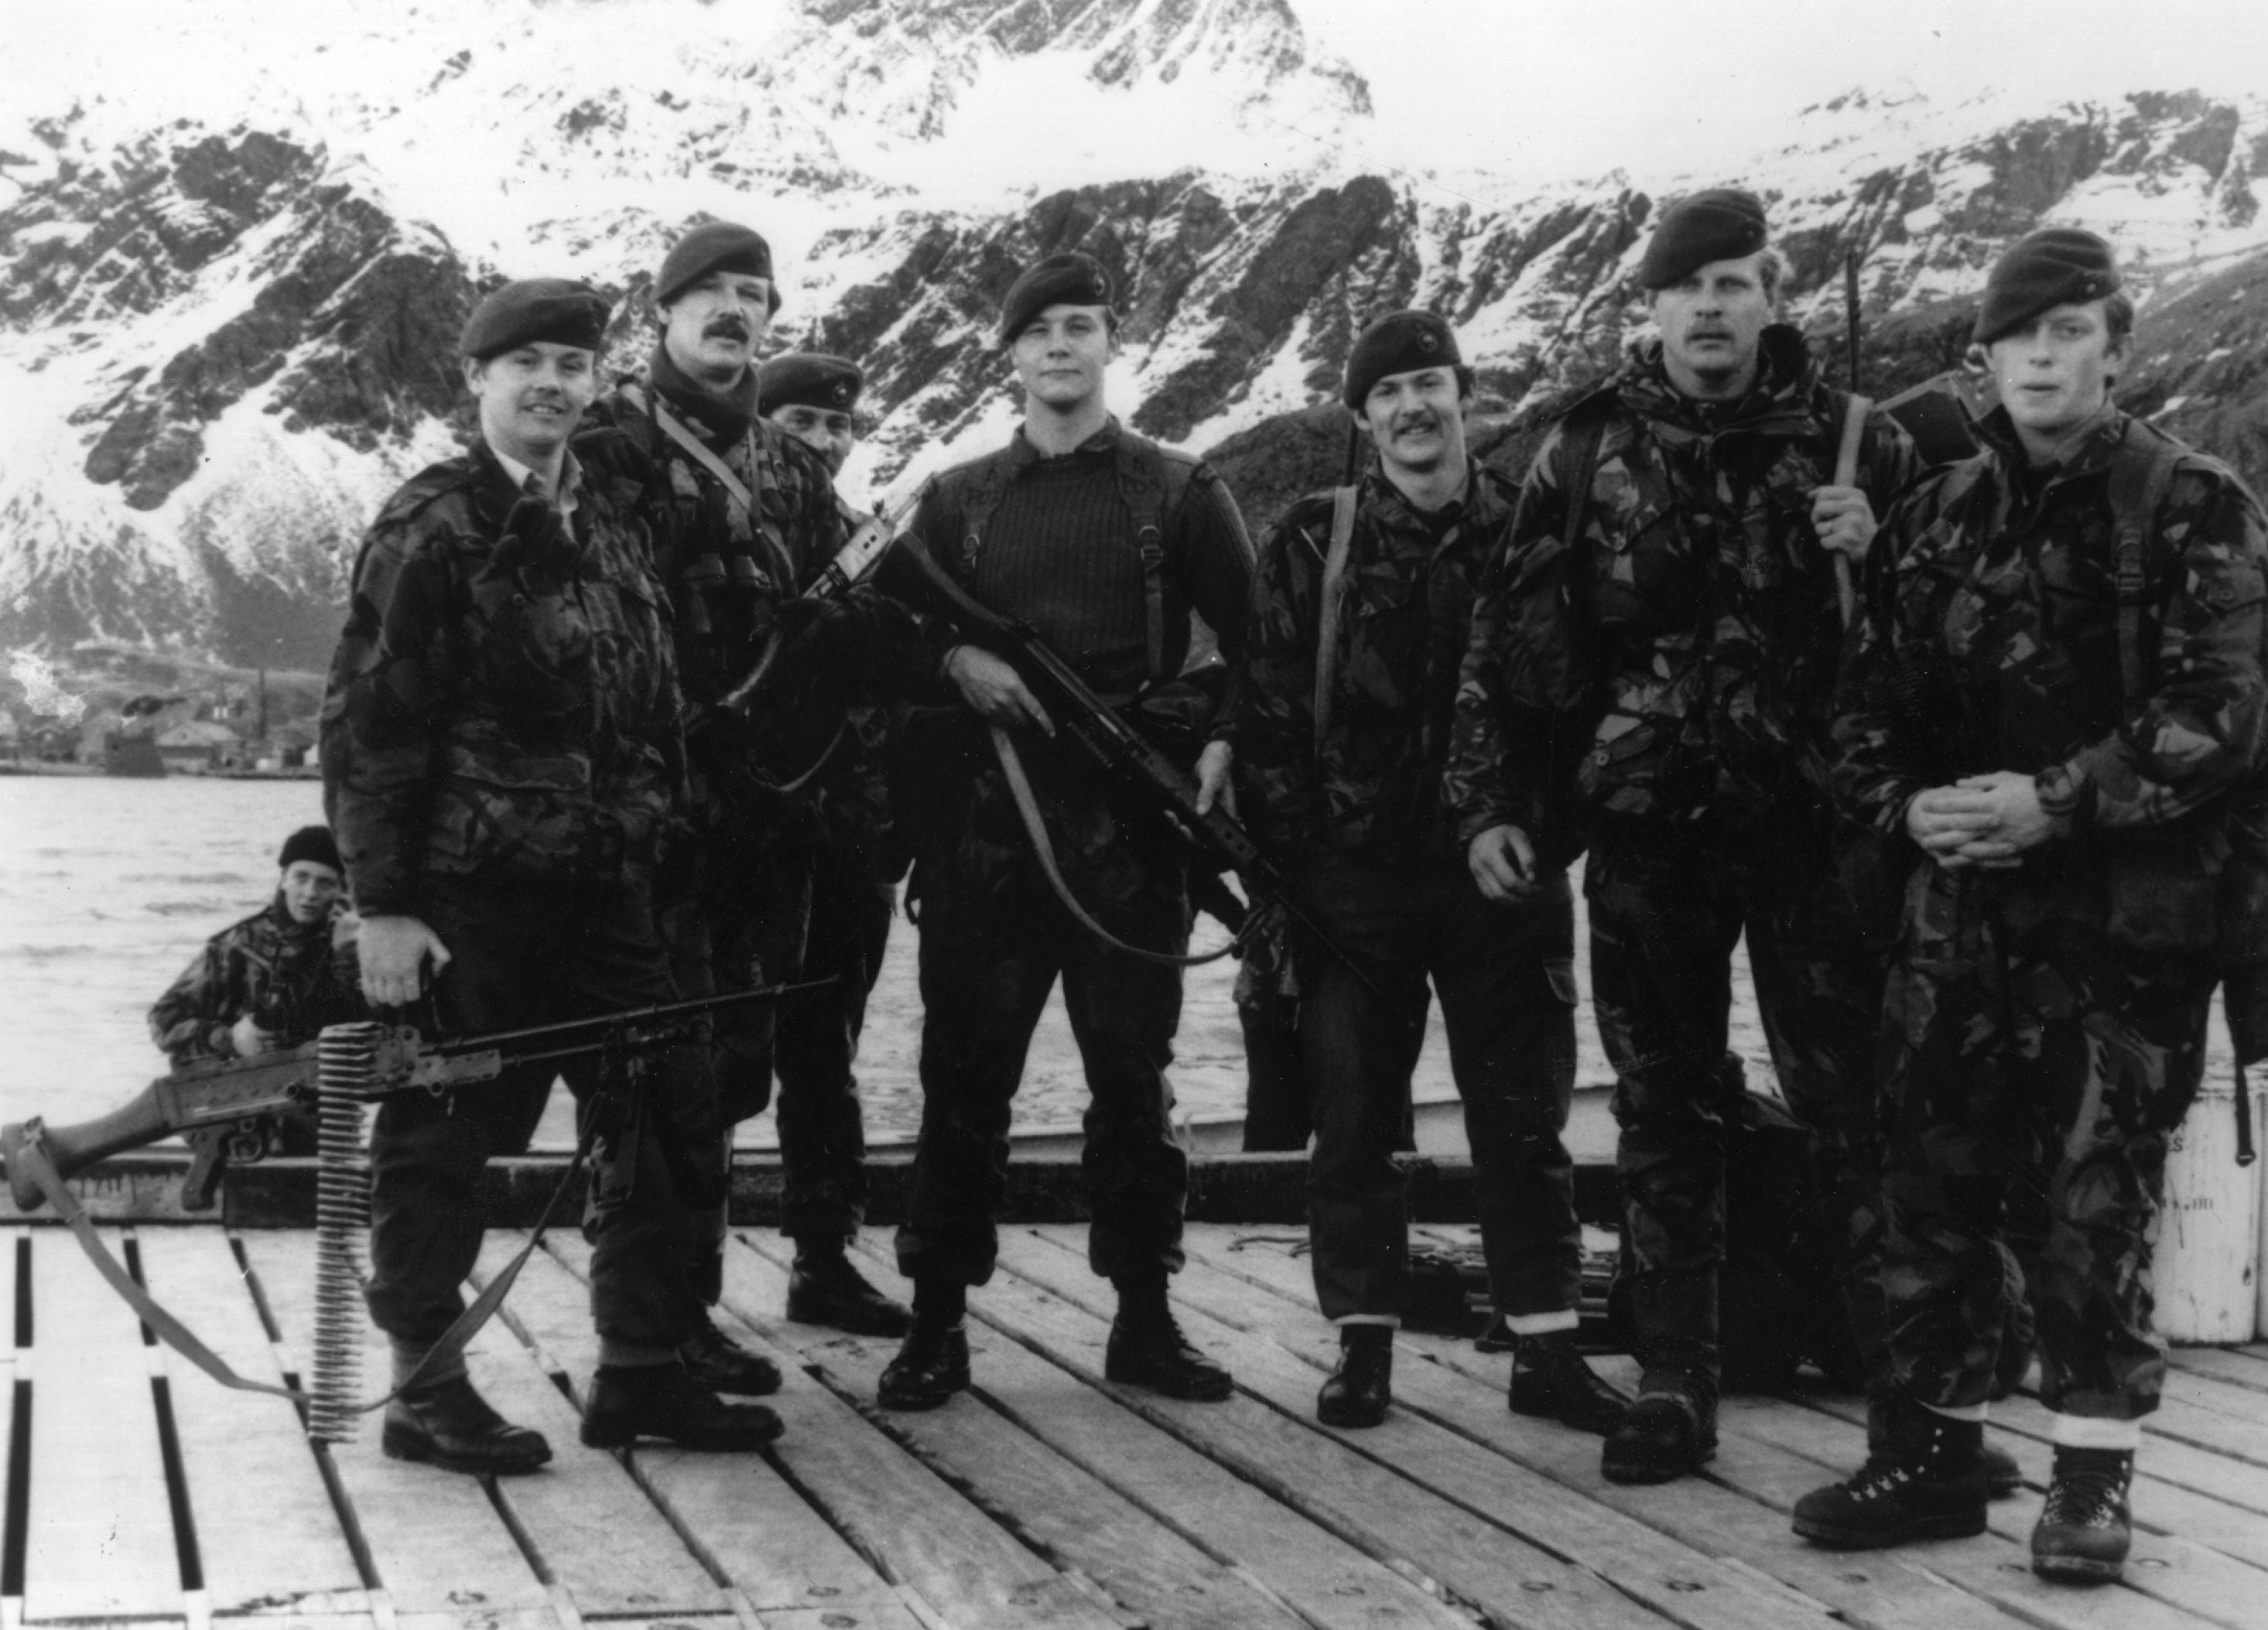 M Company of the British royal marines, who retook South Georgia from the Argentinian forces on 25 April 1982